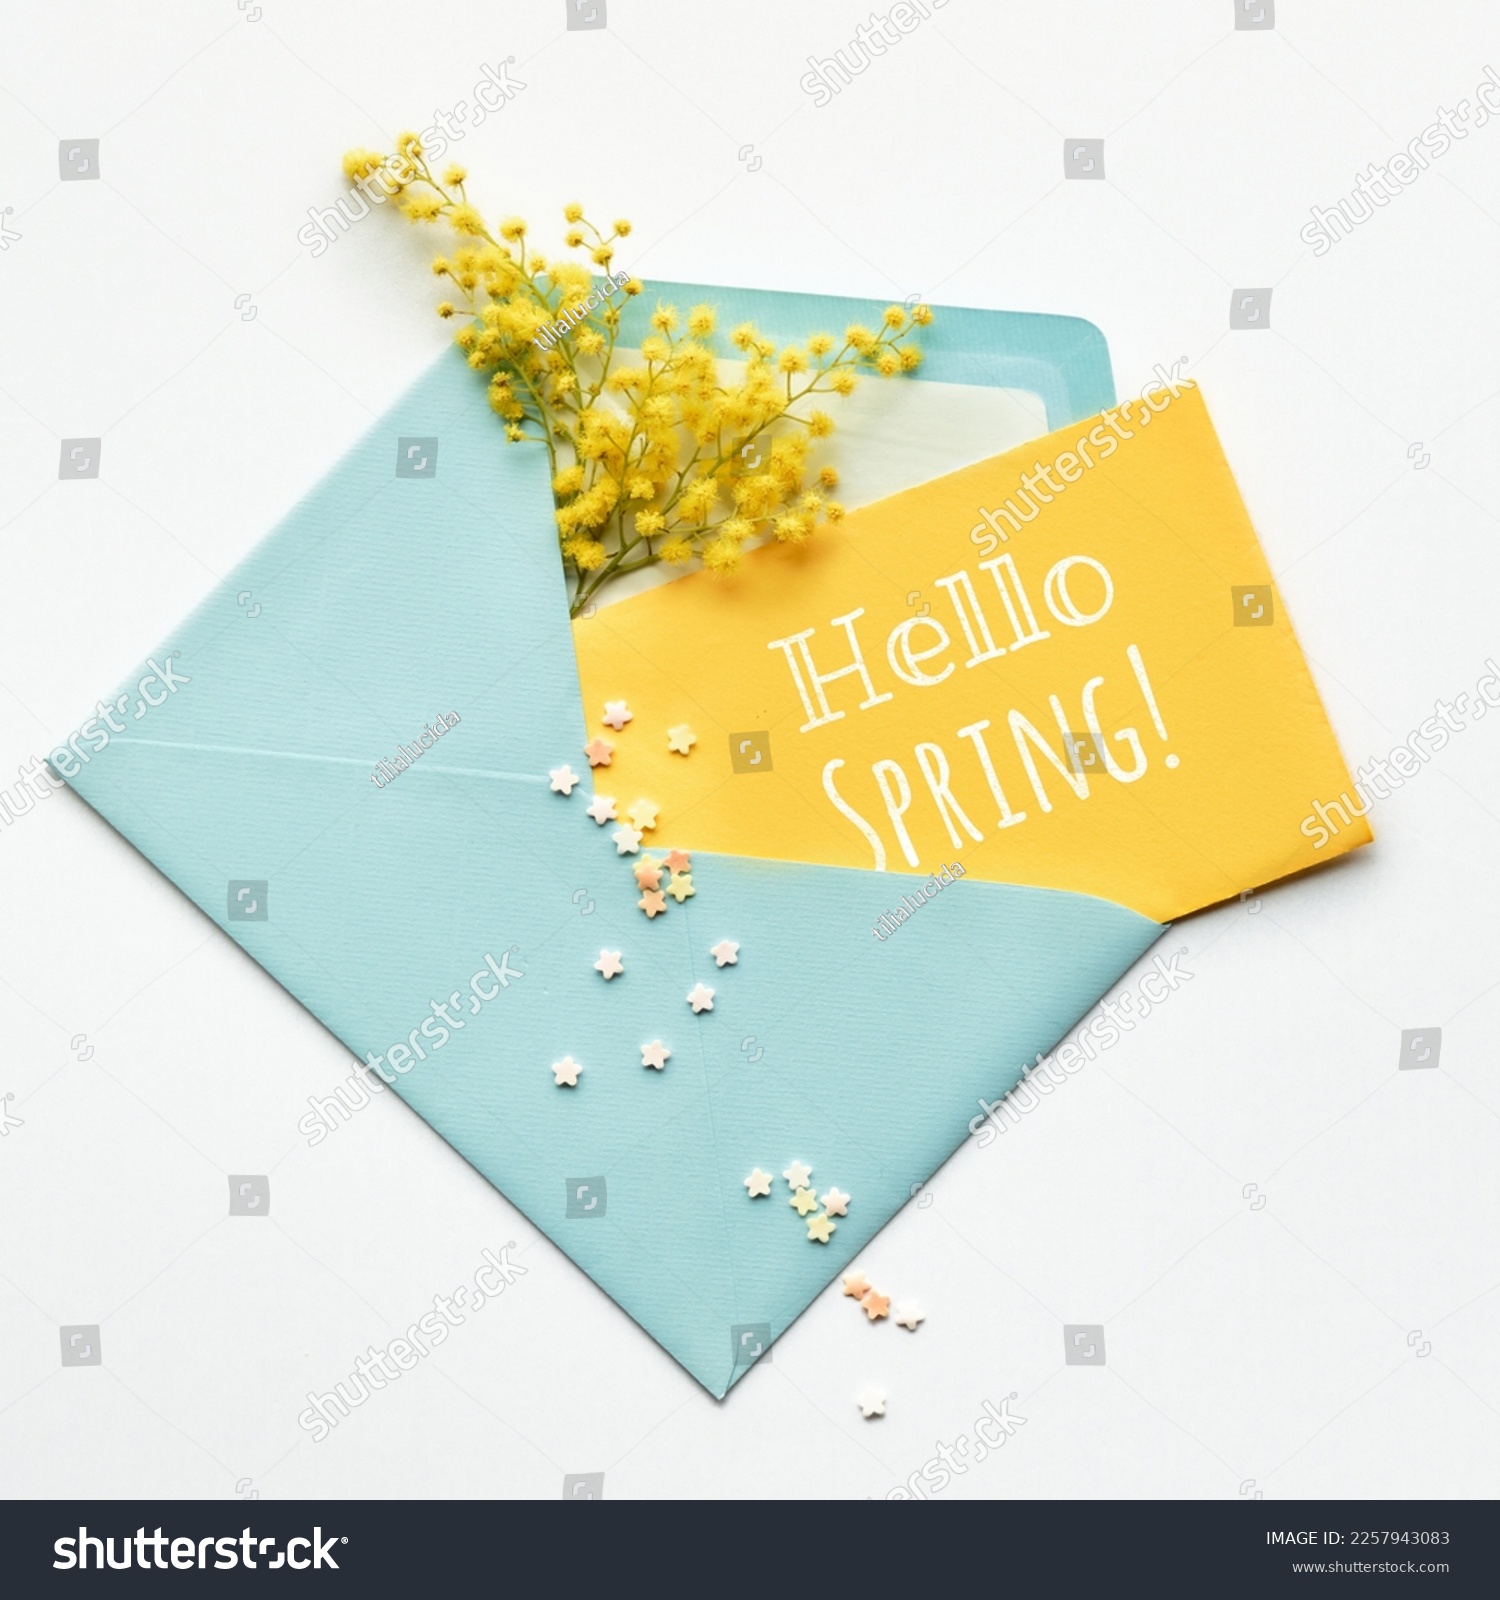 Caption Hello Spring on yellow paper card, fresh mimosa flowers in mint blue envelope on off white background. Natural springtime decor in two colors. Flat lay, top view, central composition. #2257943083